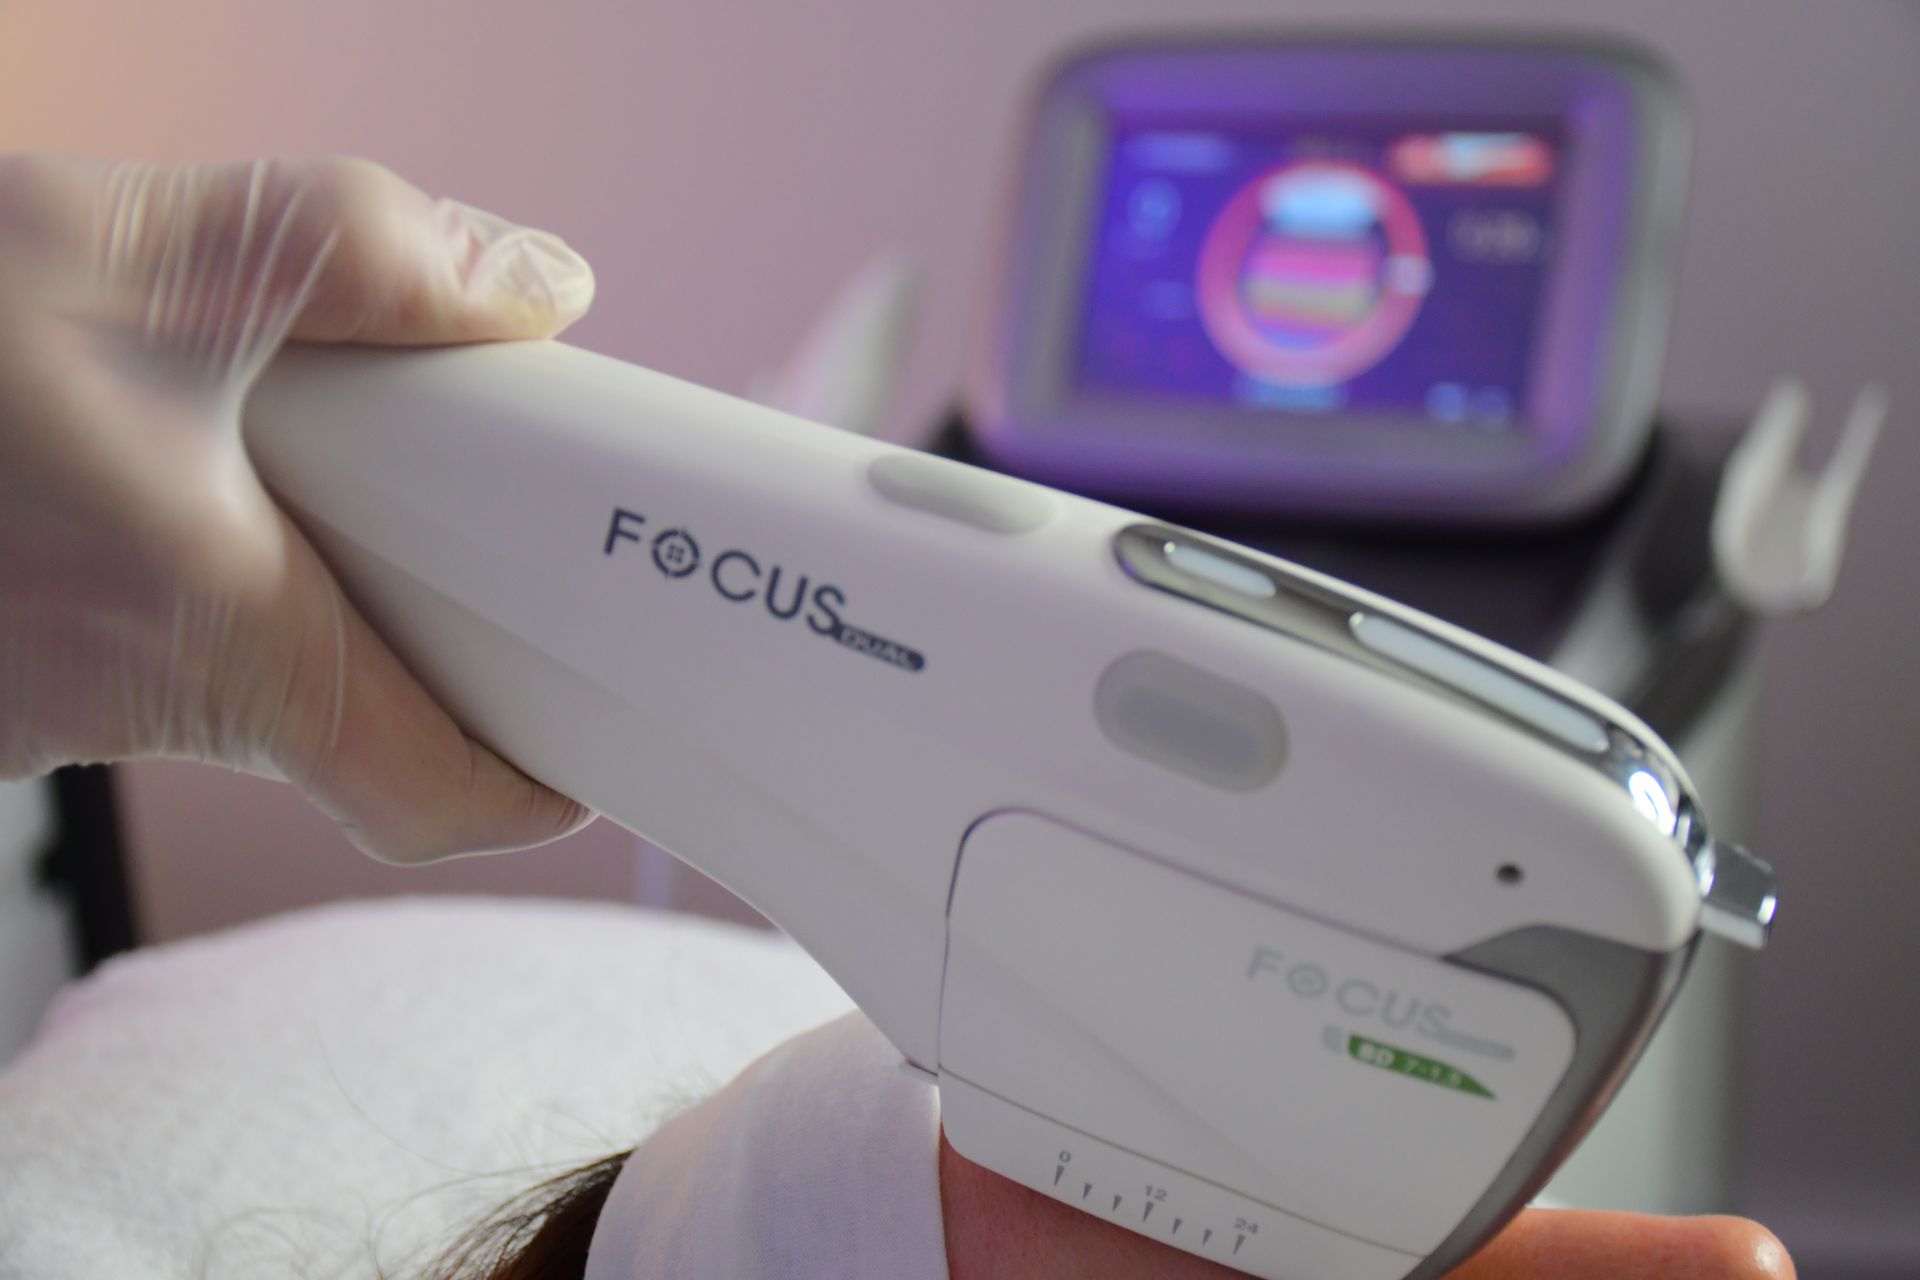 A focus Dual® High Intensity Focused Ultrasound Handpiece being used on the forehead with the Focus Dual® machine visible in the background.